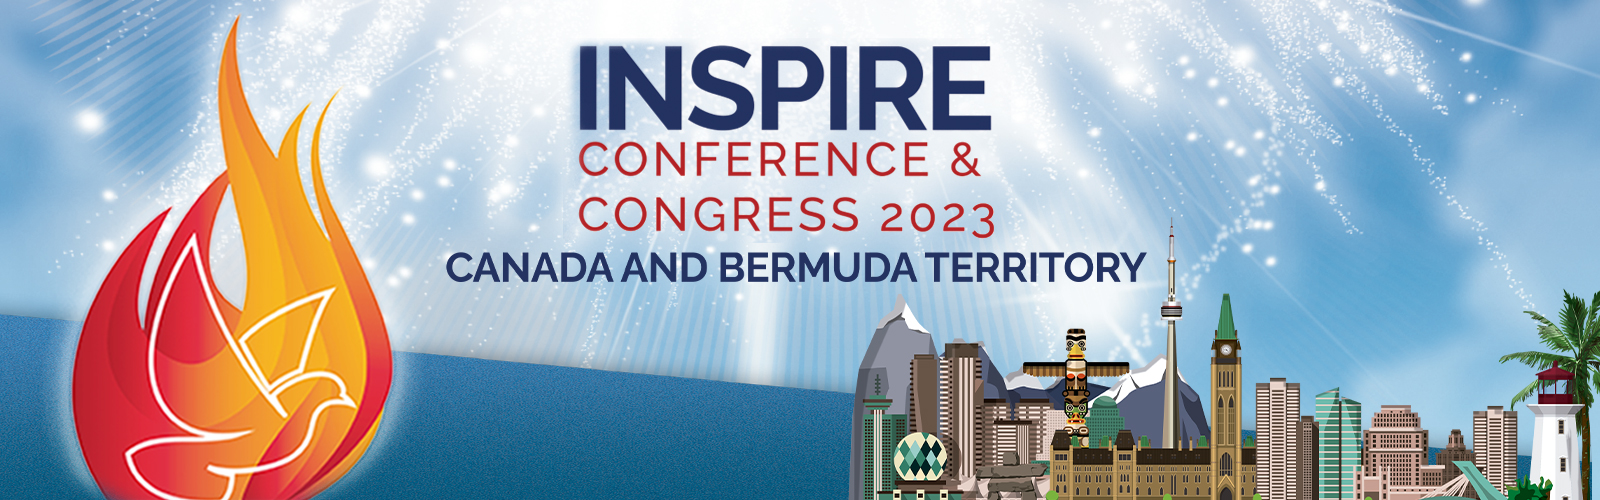 Inspire Conference & Congress 2023 Canada and Bermuda Territory Web Banner